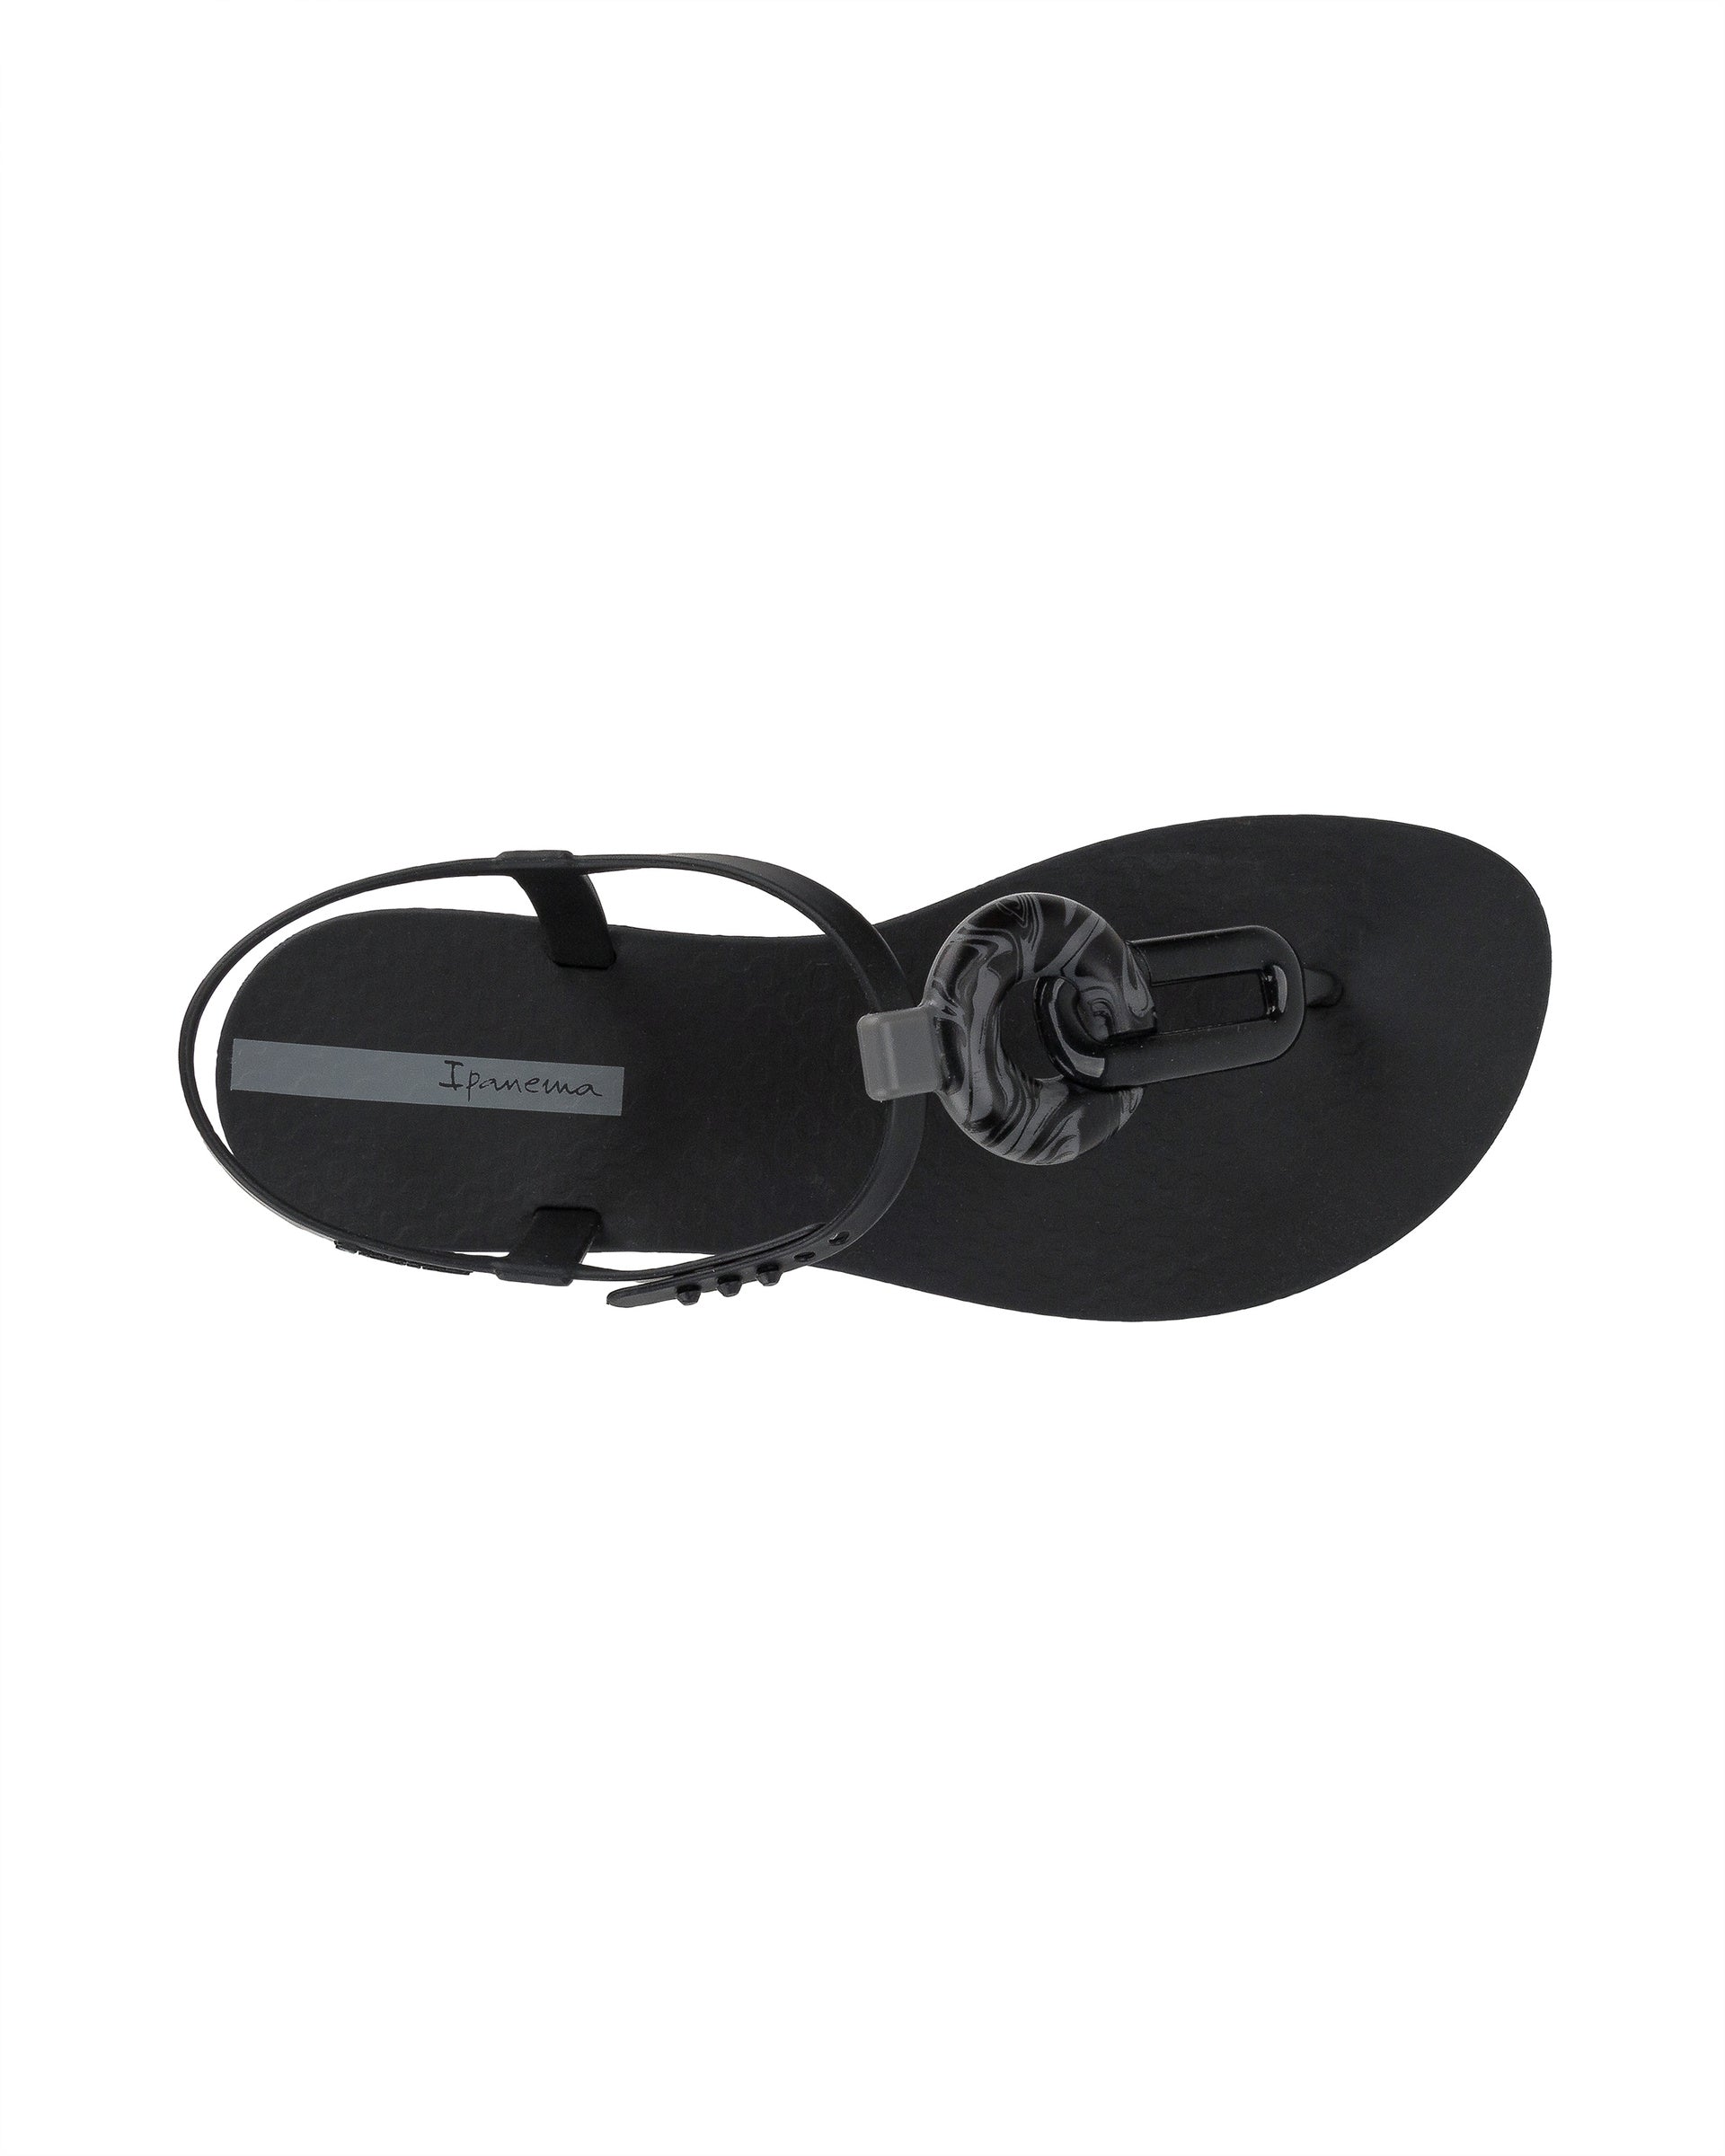 Top view of a black Ipanema Class Marble women's t-strap sandal.